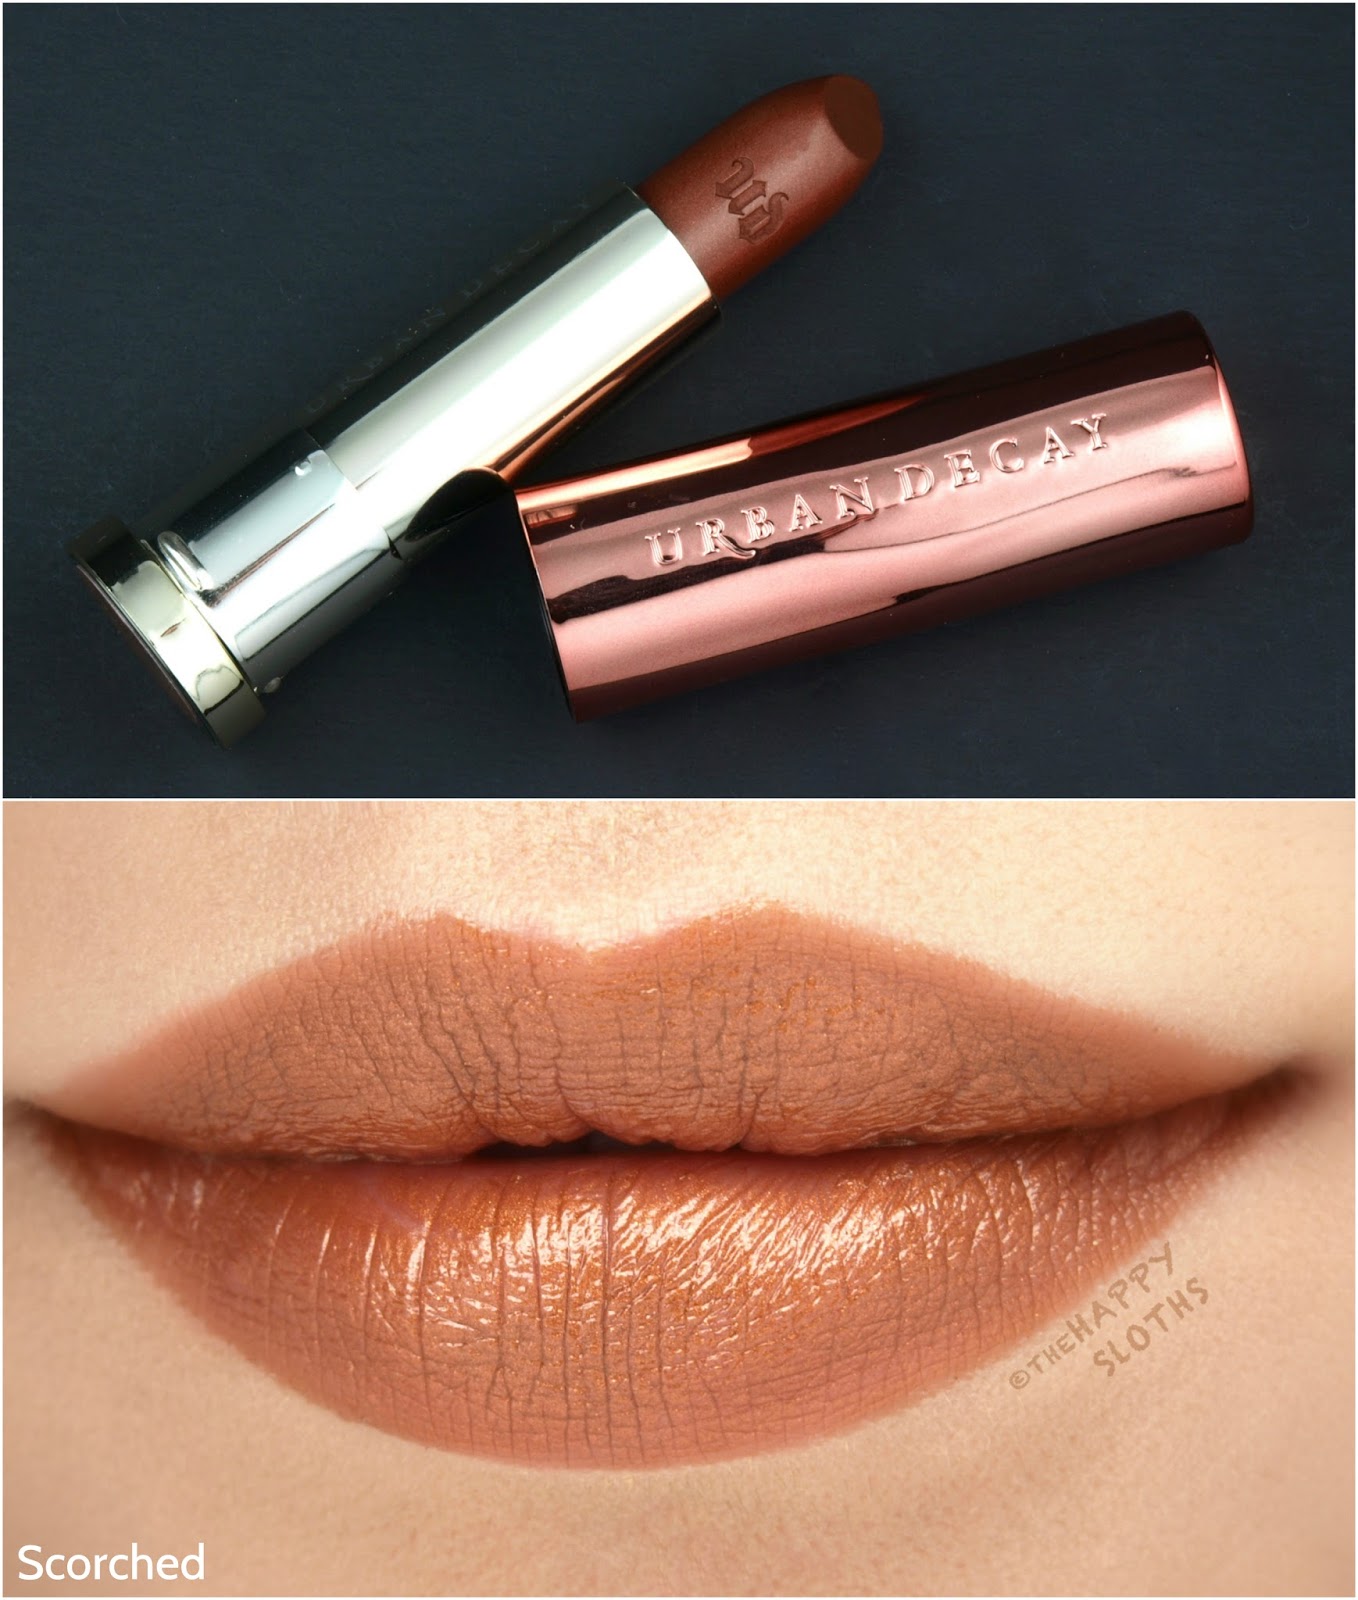 Urban Decay Naked Heat Vice Lipstick in "Scorched": Review and Swatches